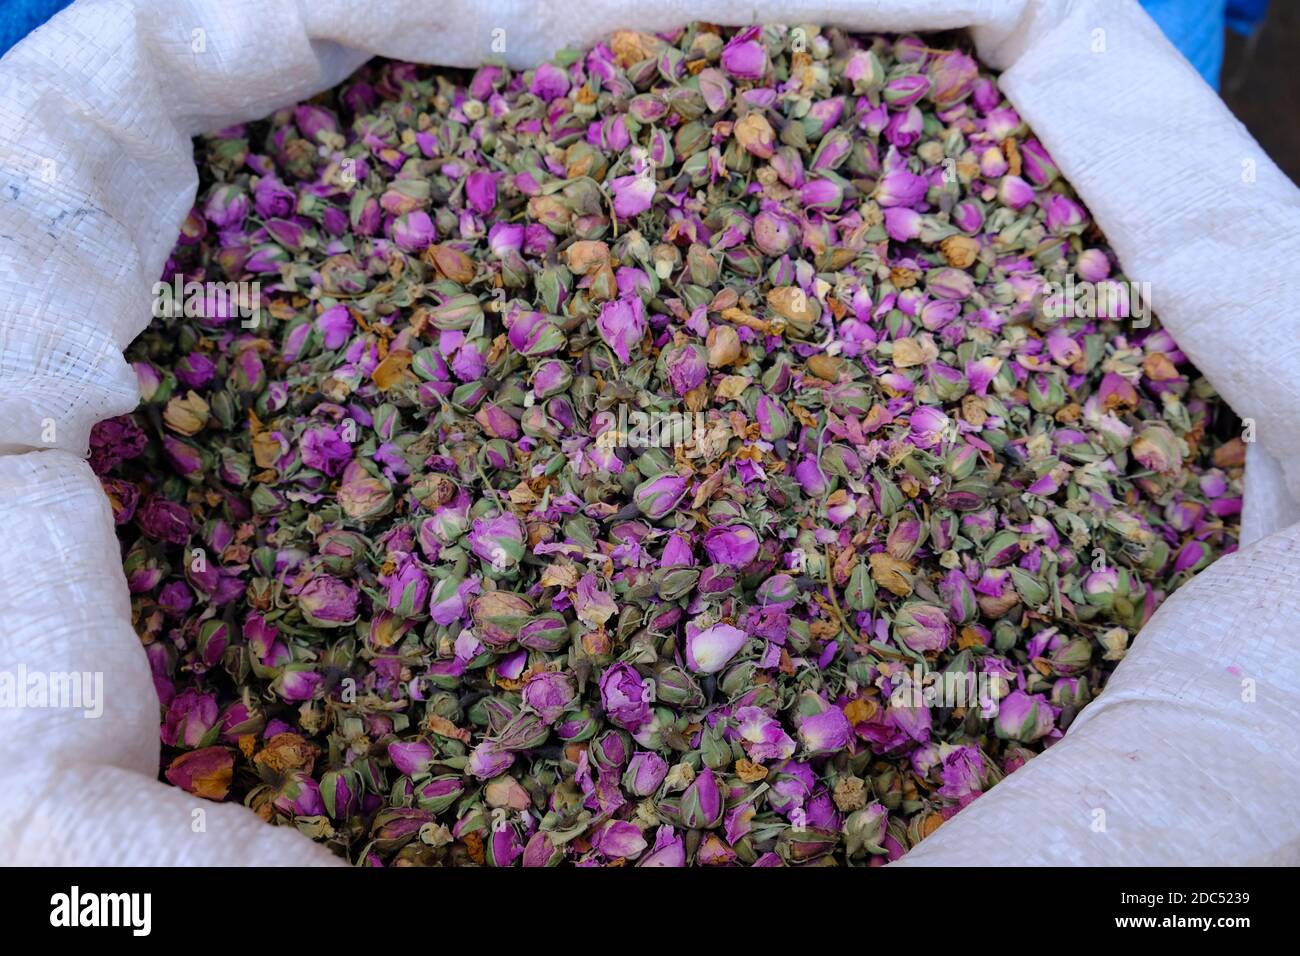 Morocco Marrakesh - Colorful Clover blossoms of a spice dealer Stock Photo